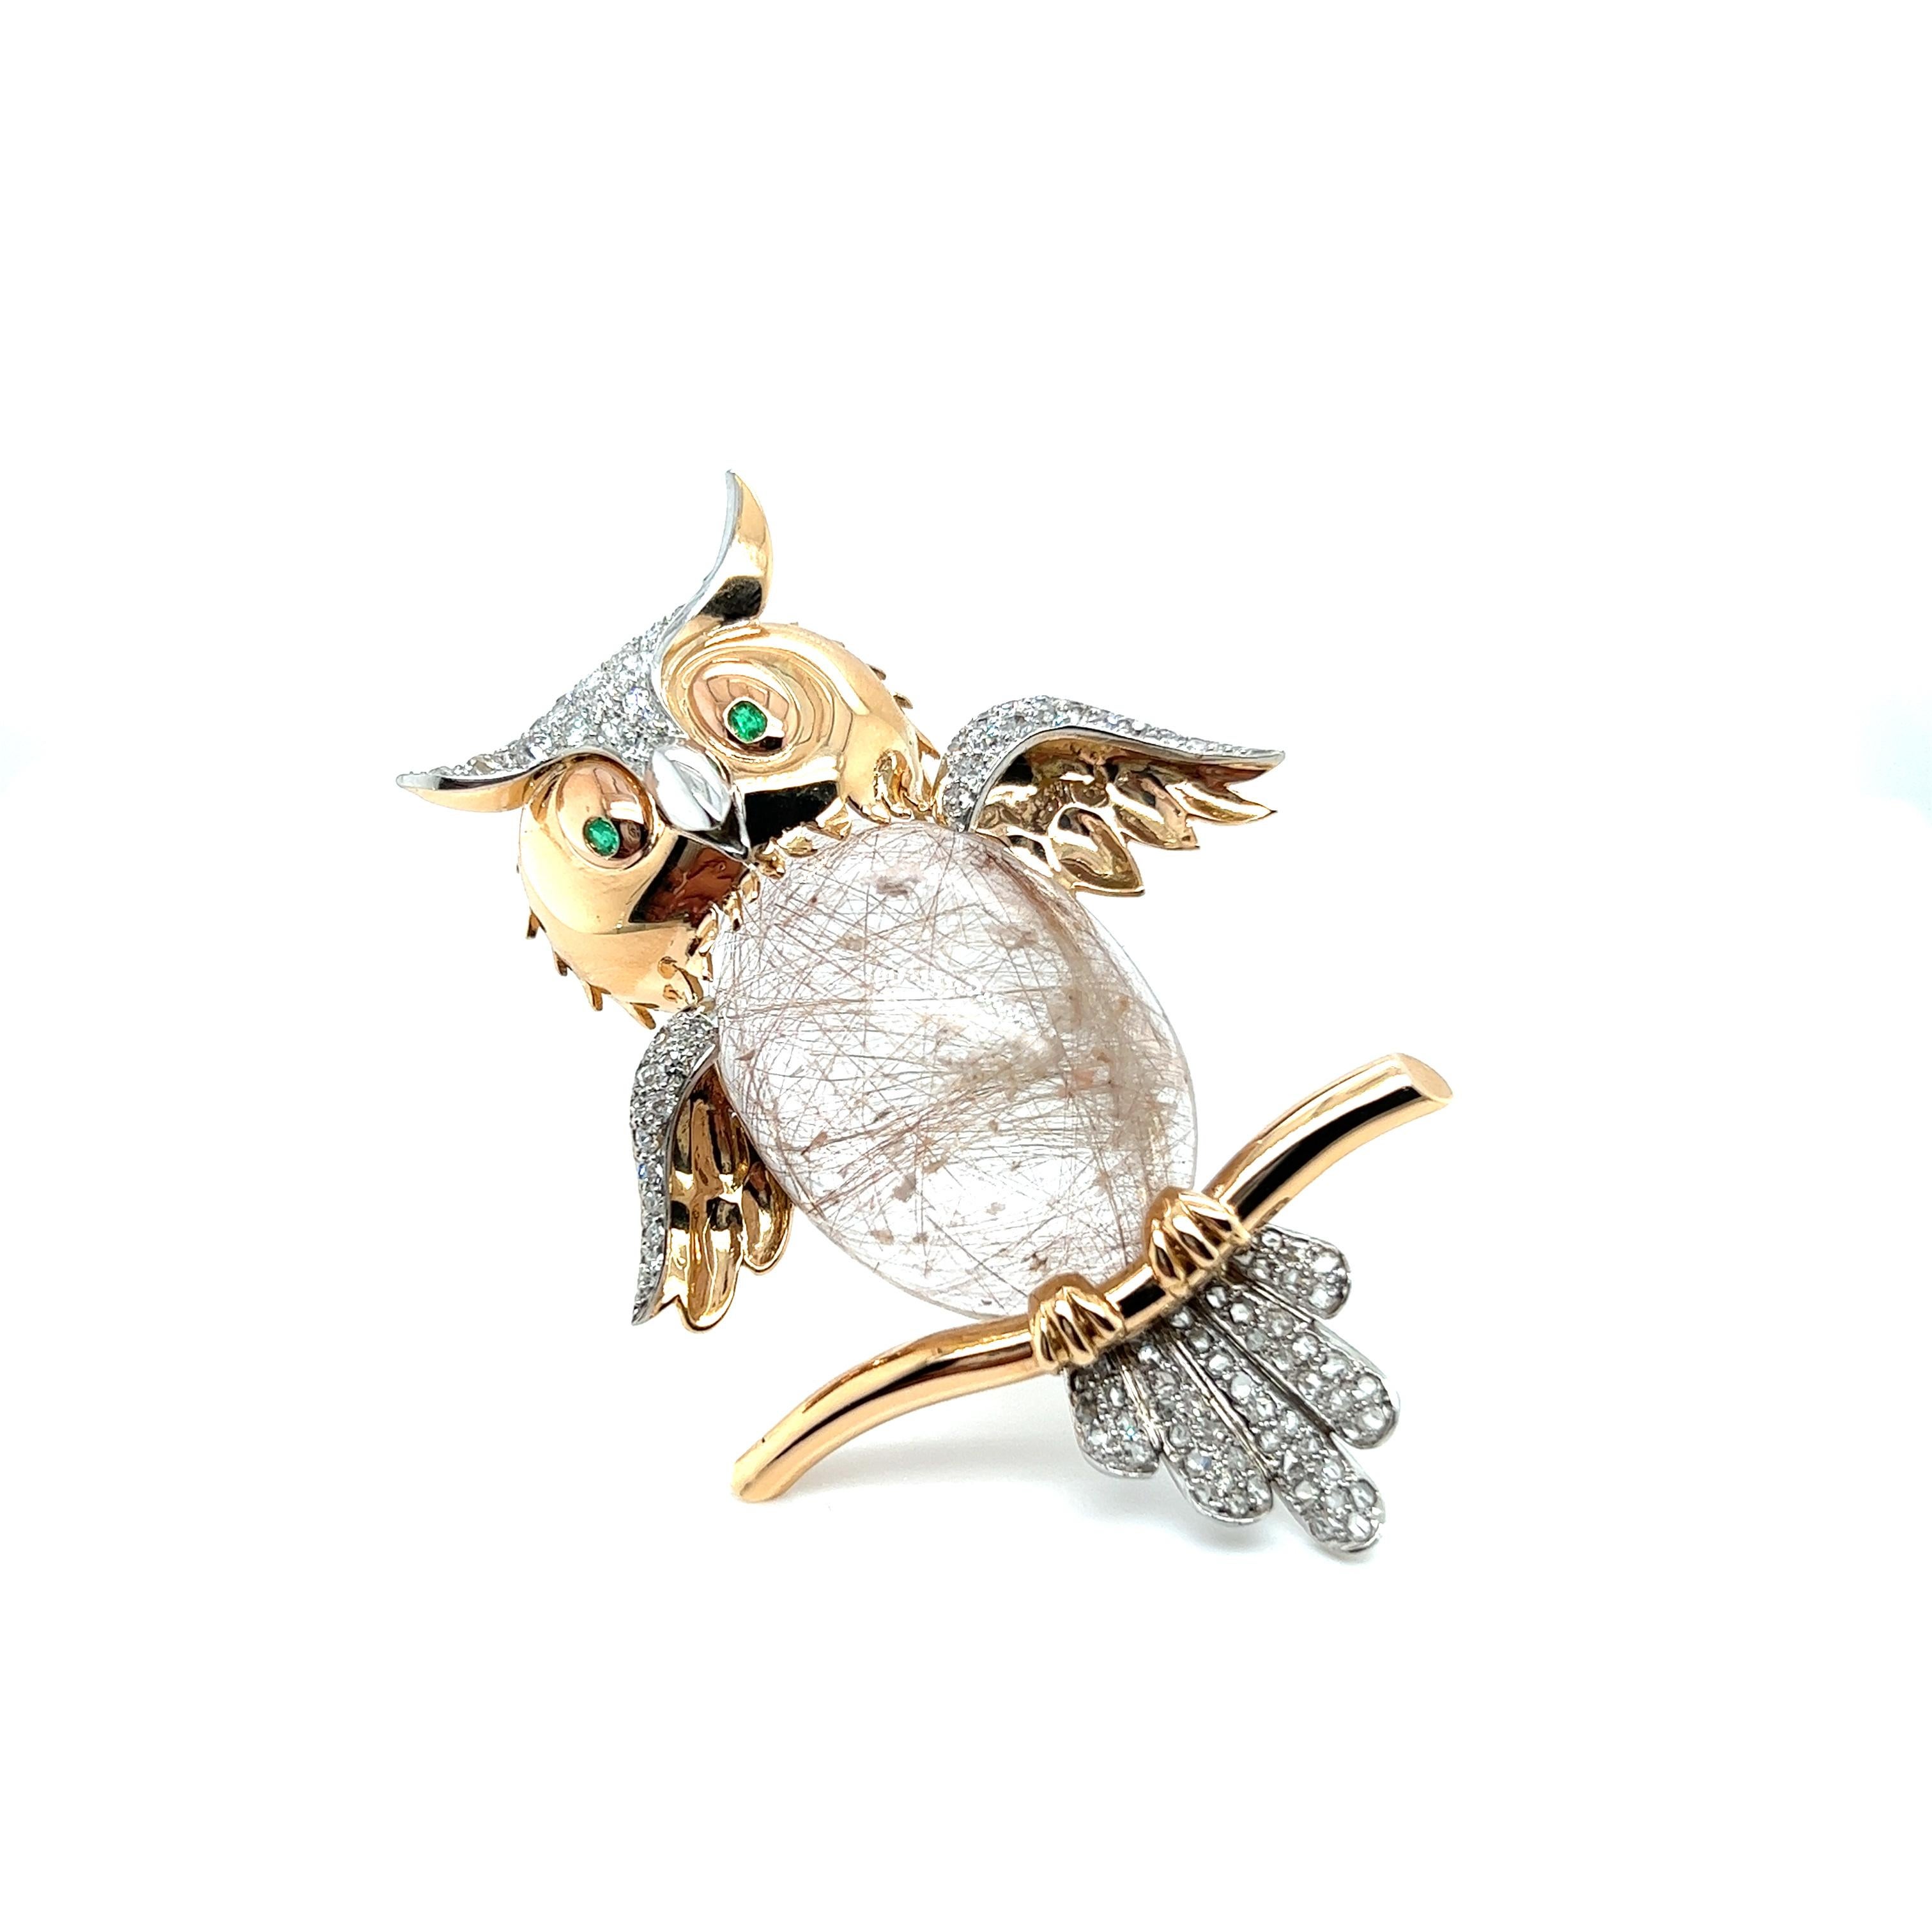 Playful and charming, this owl brooch is a fun piece of jewelry for a versatile collection. 

This funky piece is expertly crafted in a blend of 18 Karat red and white gold, enhancing its intricate details. Perched on a branch, the owl's body is